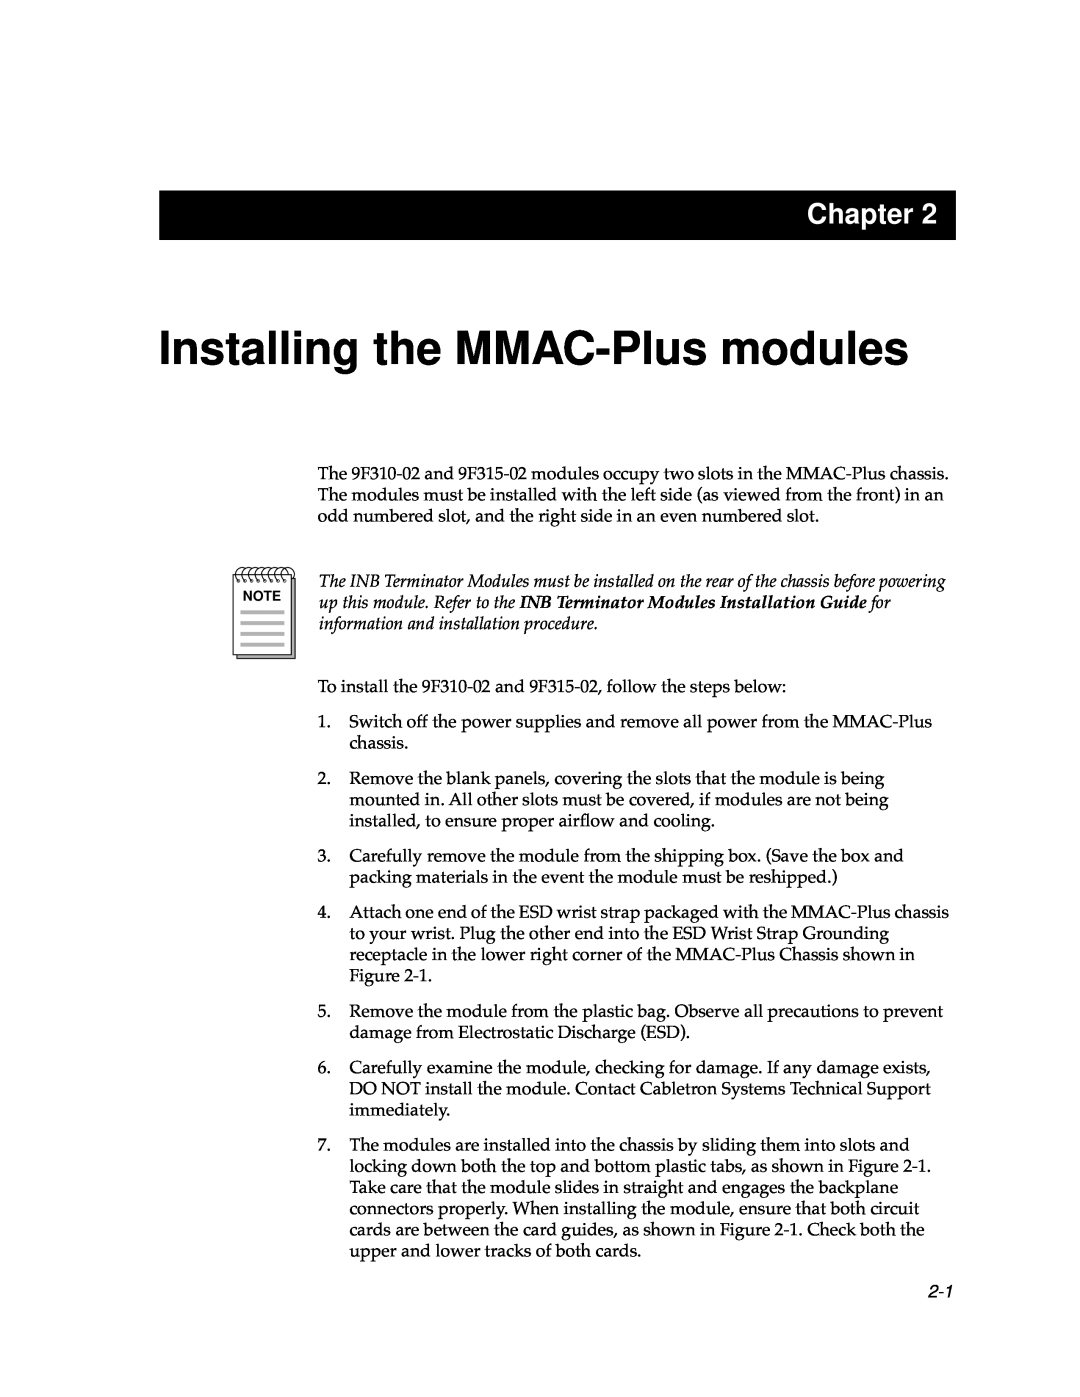 Cabletron Systems 9F315-02, 9F310-02 manual Installing the MMAC-Plus modules, Chapter 